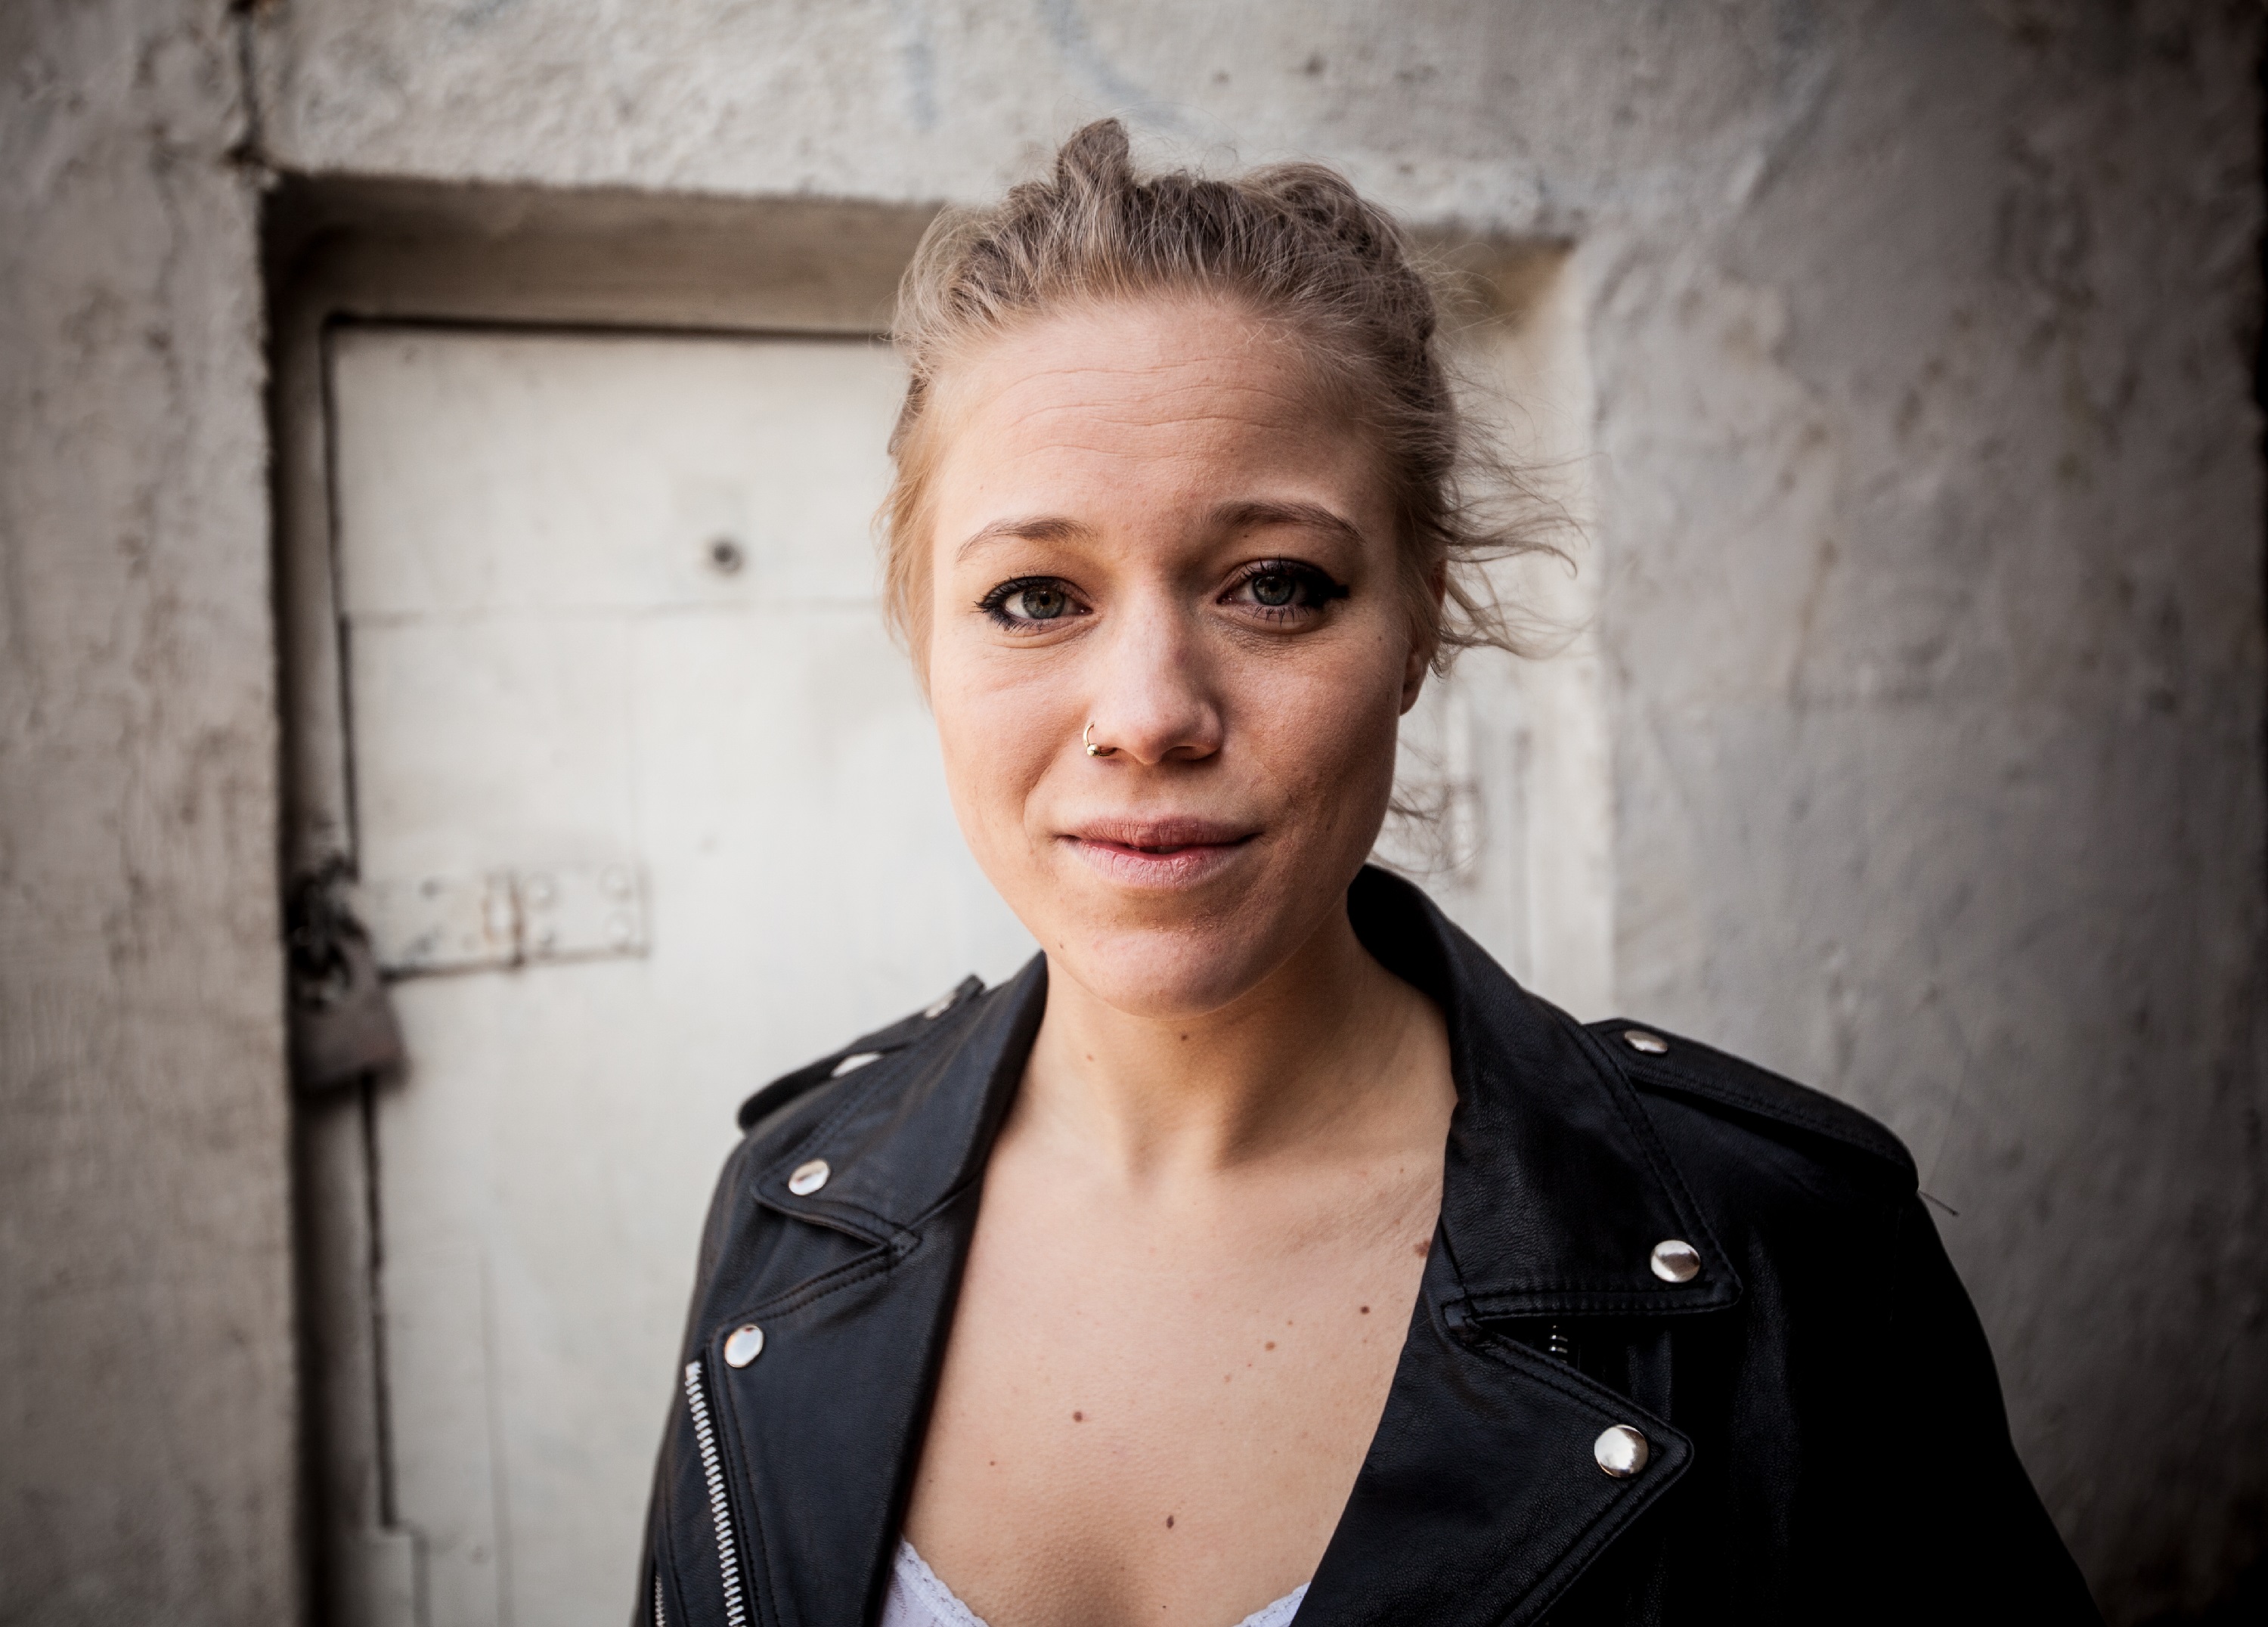 Blonde woman with hair tied back, nose piercing and leather jacket